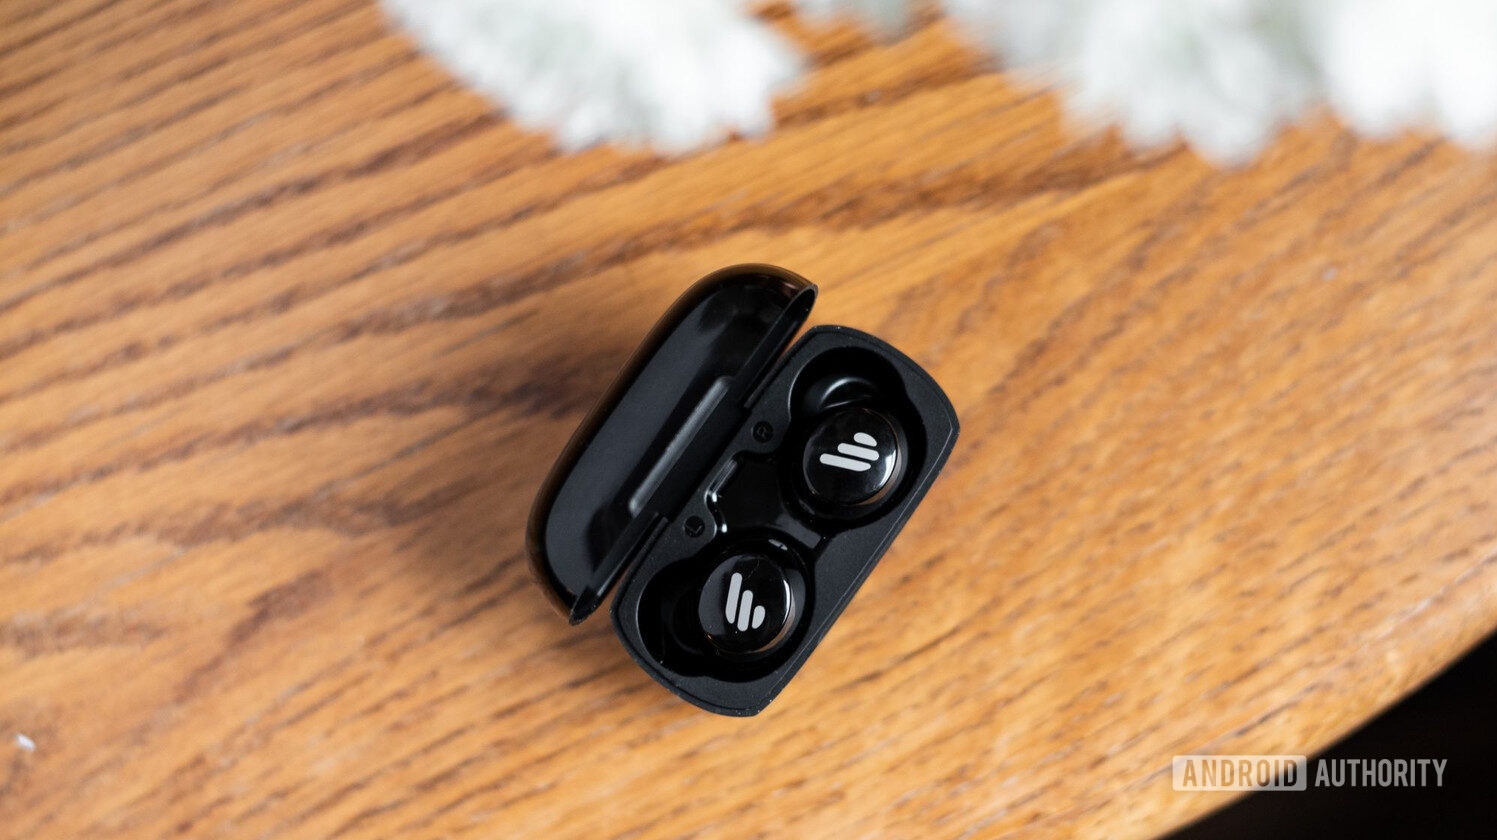 Why pay extra for expensive earbuds when cheap earbuds sound good enough?